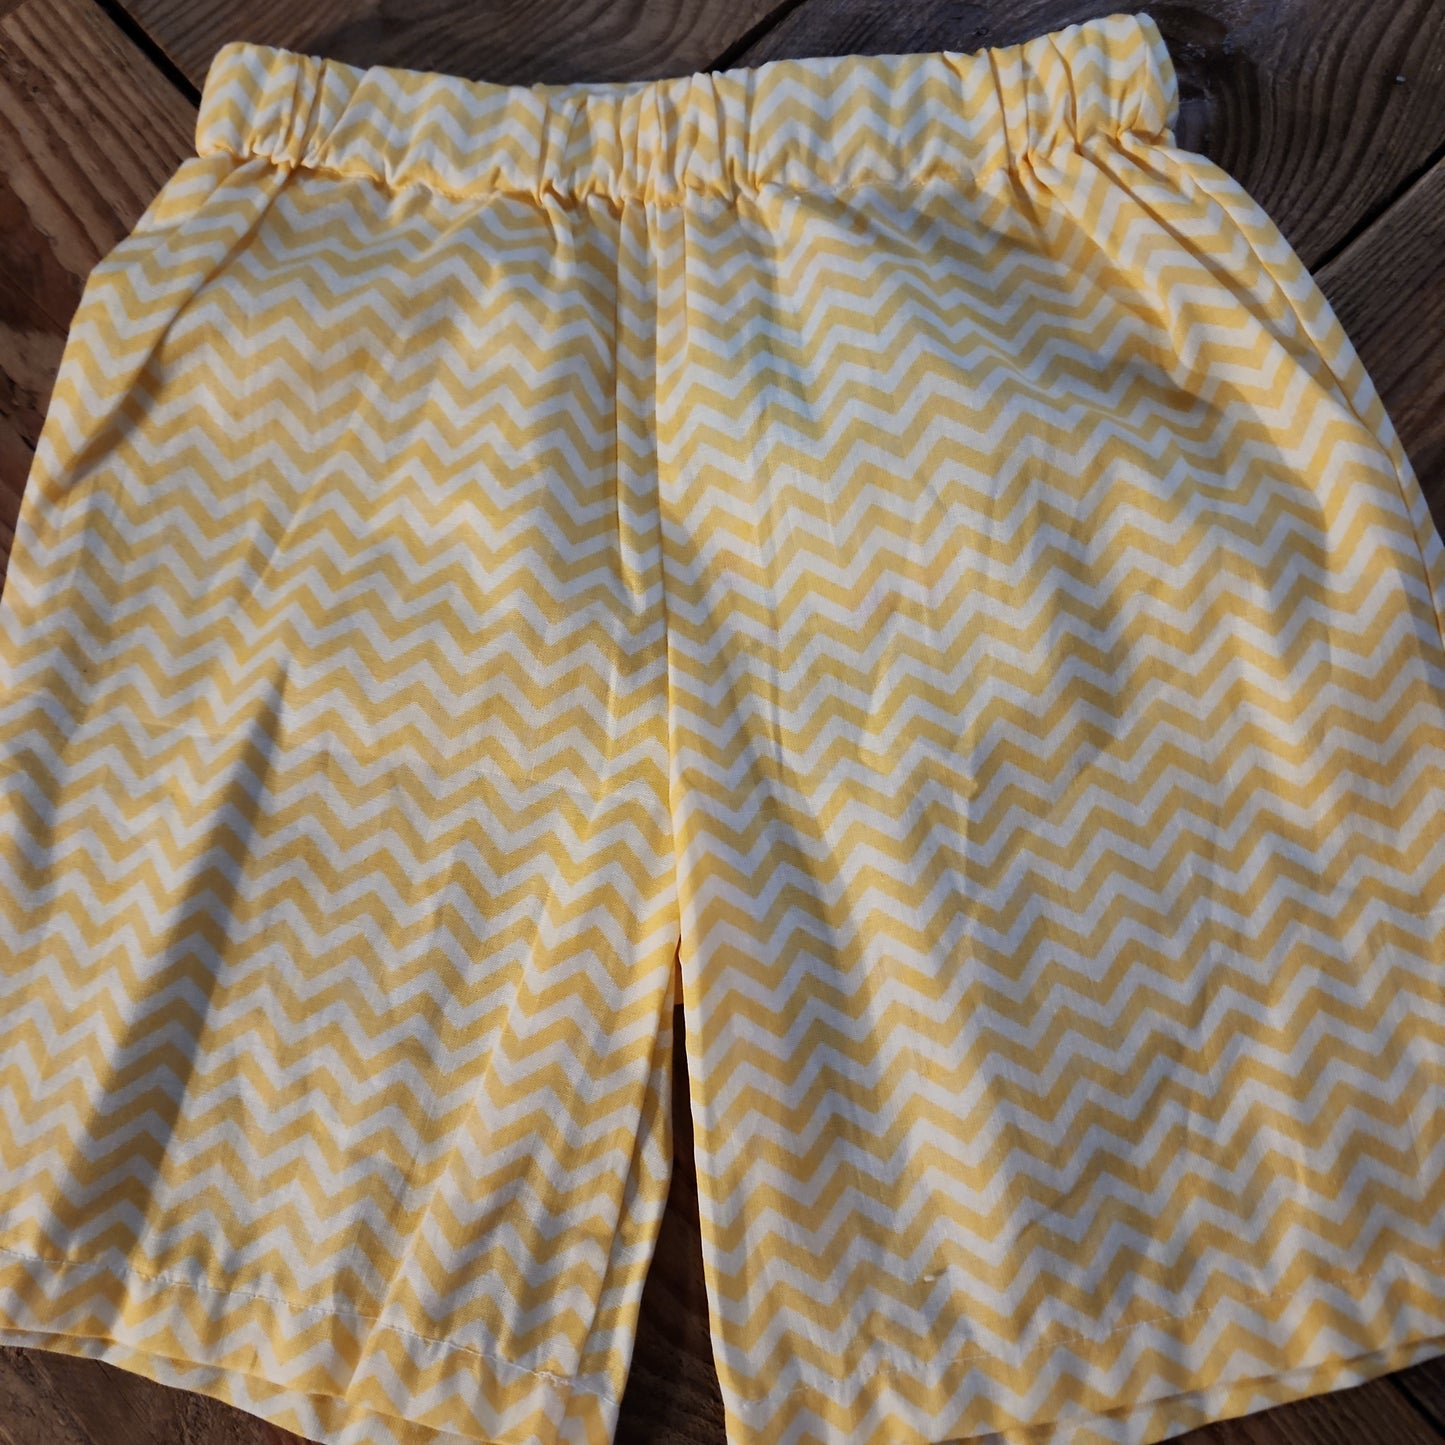 Yellow and White Size 24m/2 shorts